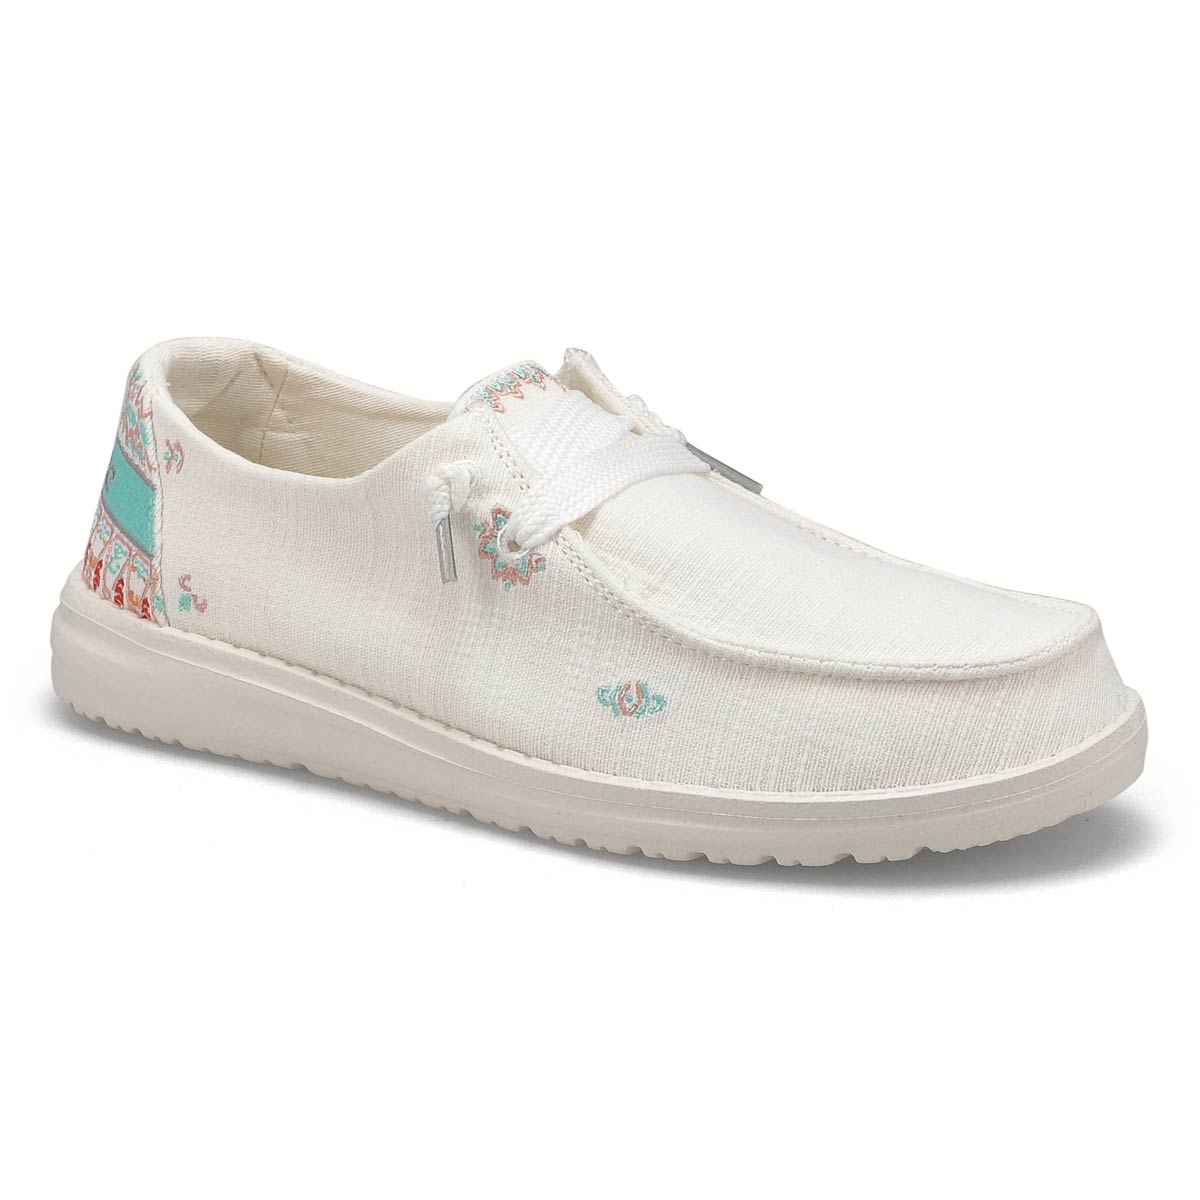 35% off on Hey Dude Ladies Wendy Linen Shoes